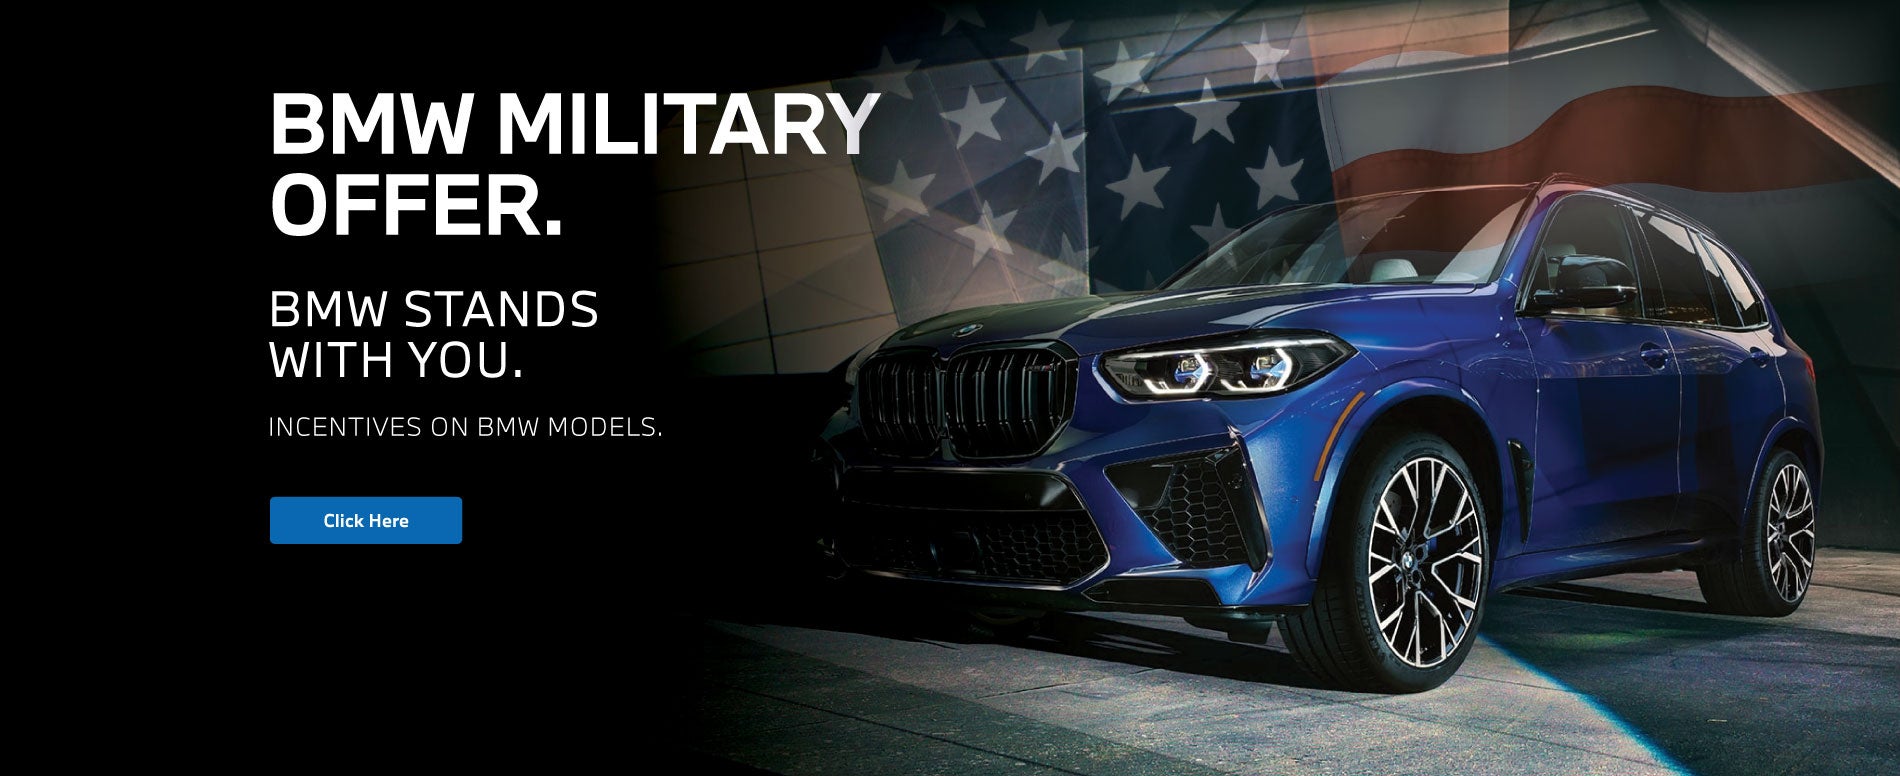 BMW Military Offer